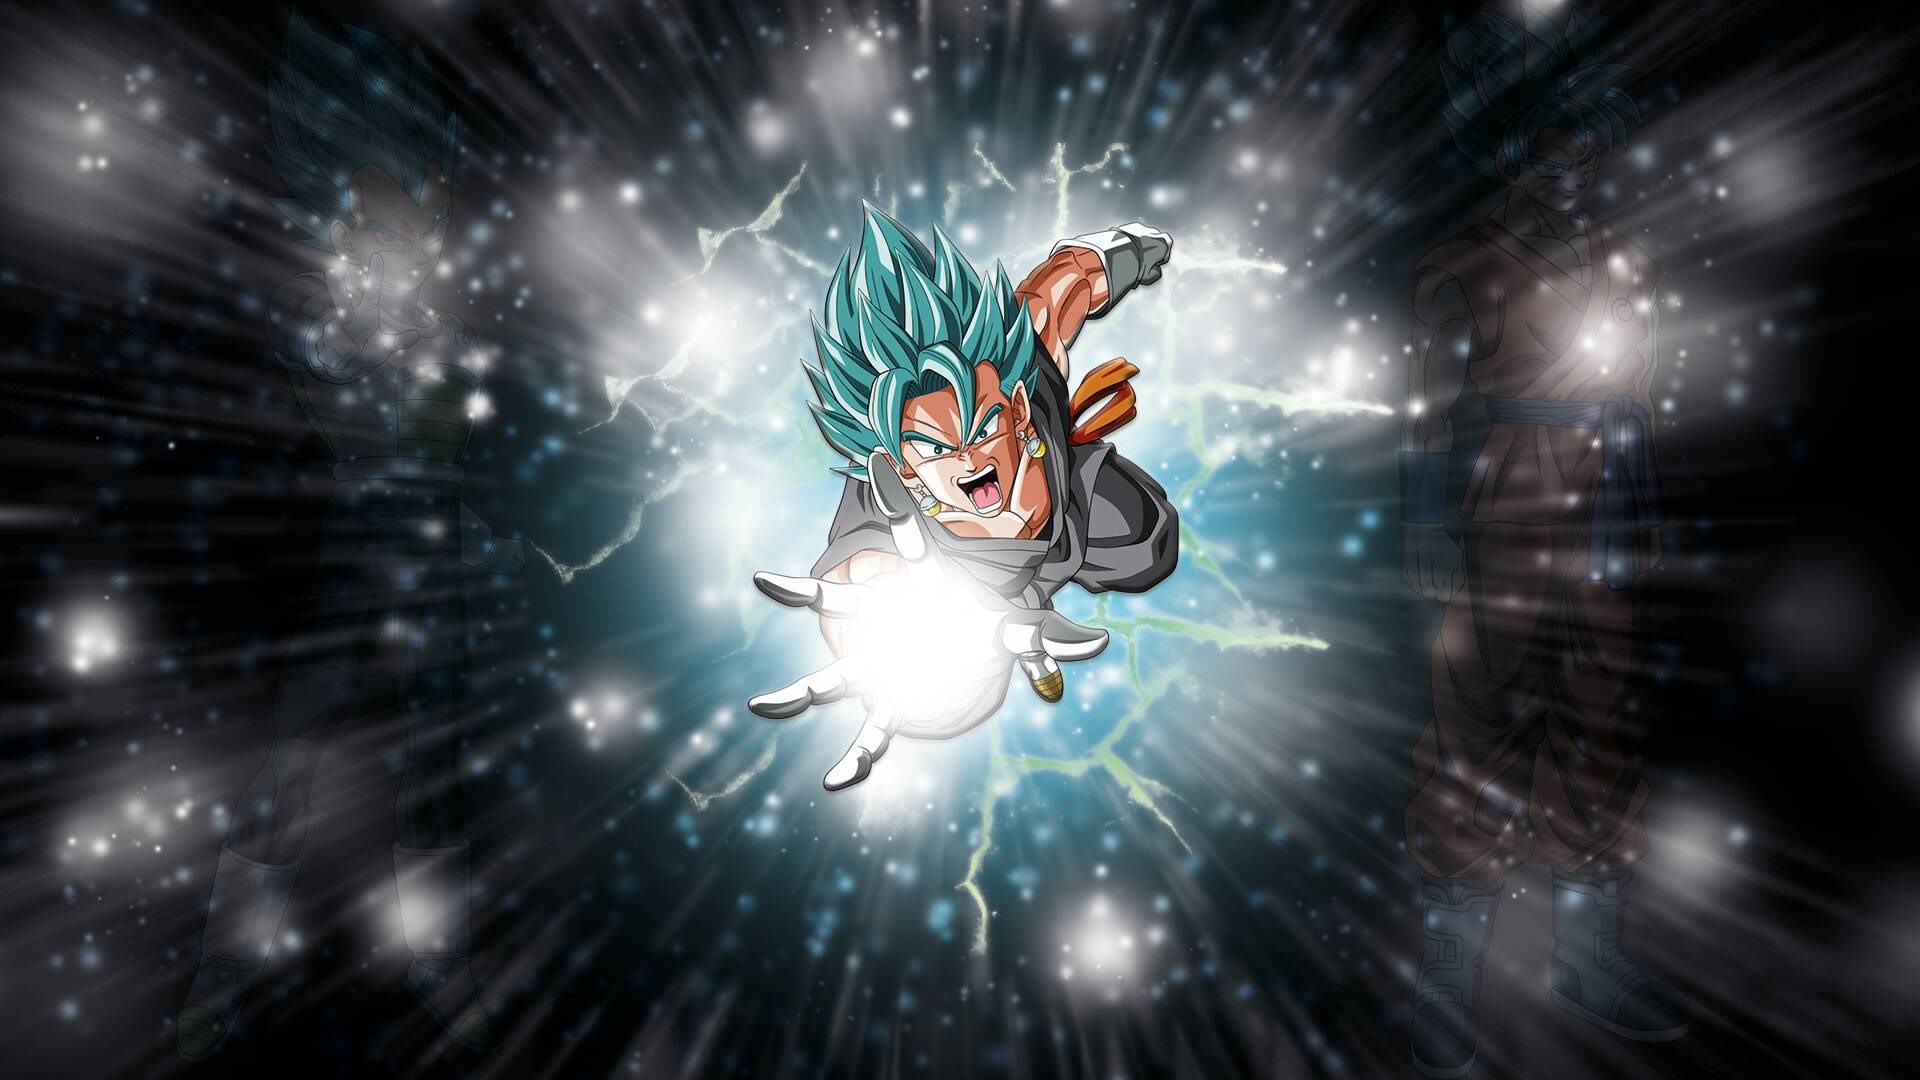 dragon ball super images for backgrounds desktop free – dragon ball super  category